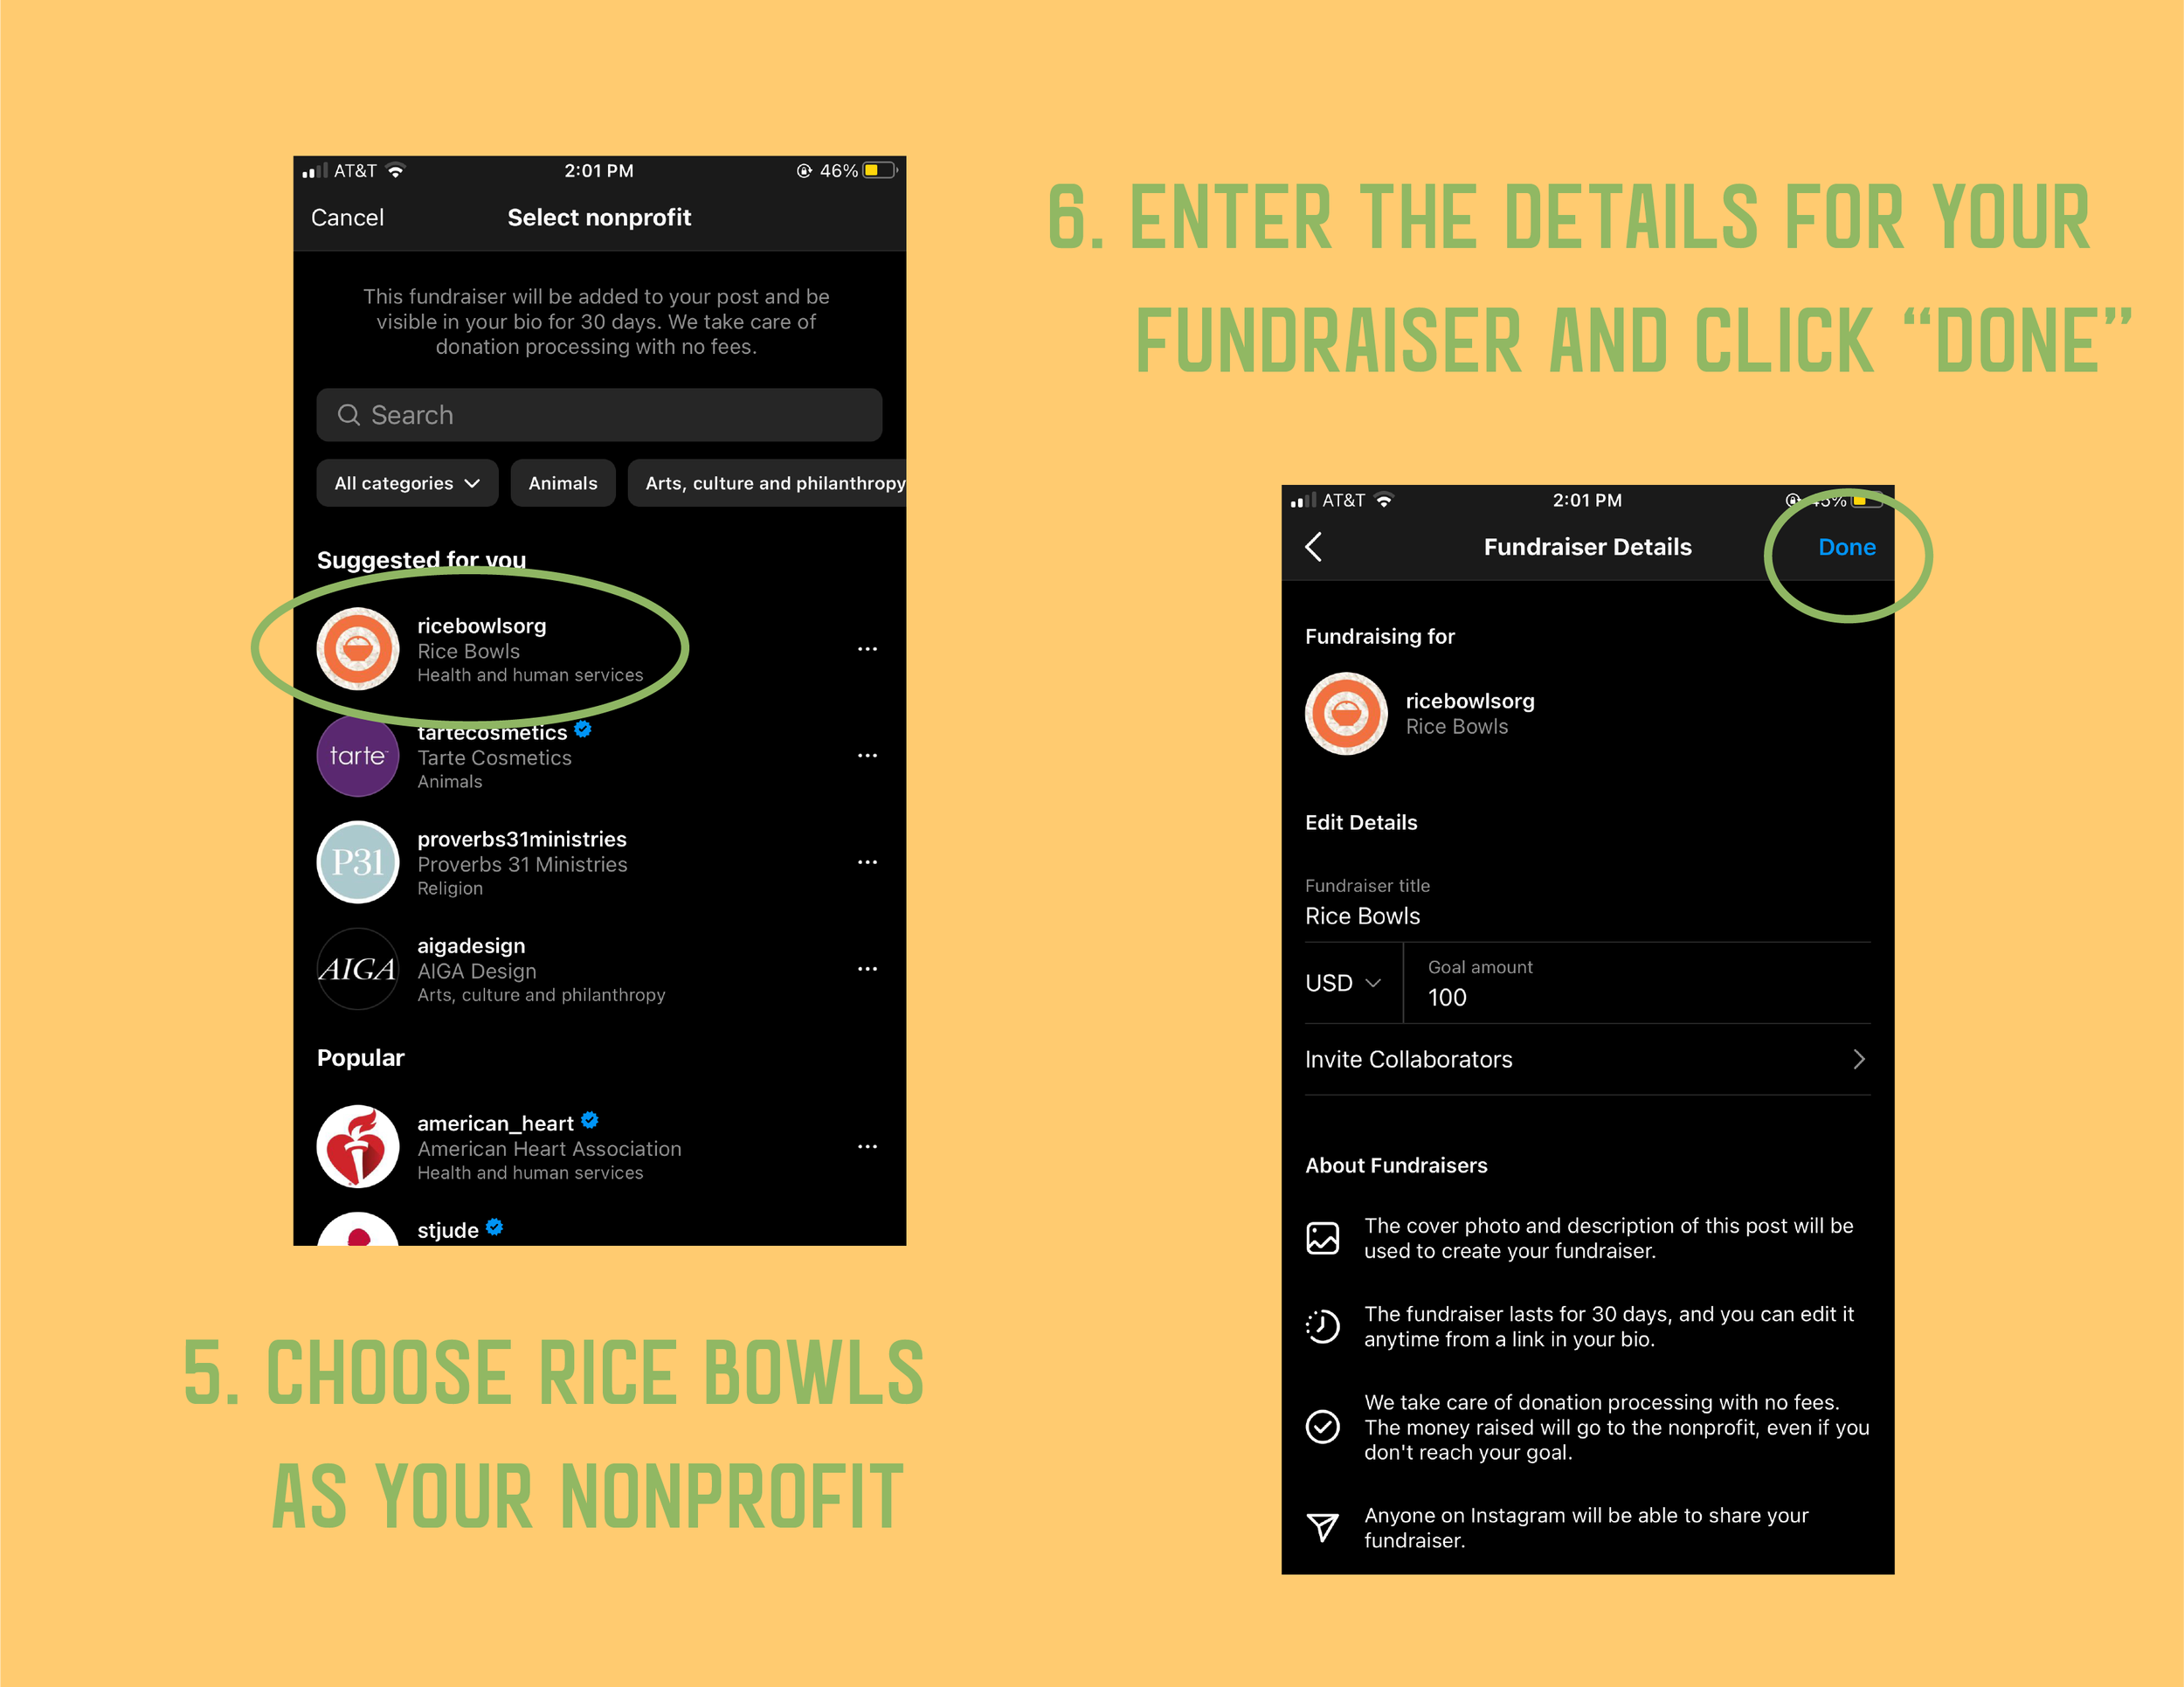 ig-fundraiser-guide-04.png